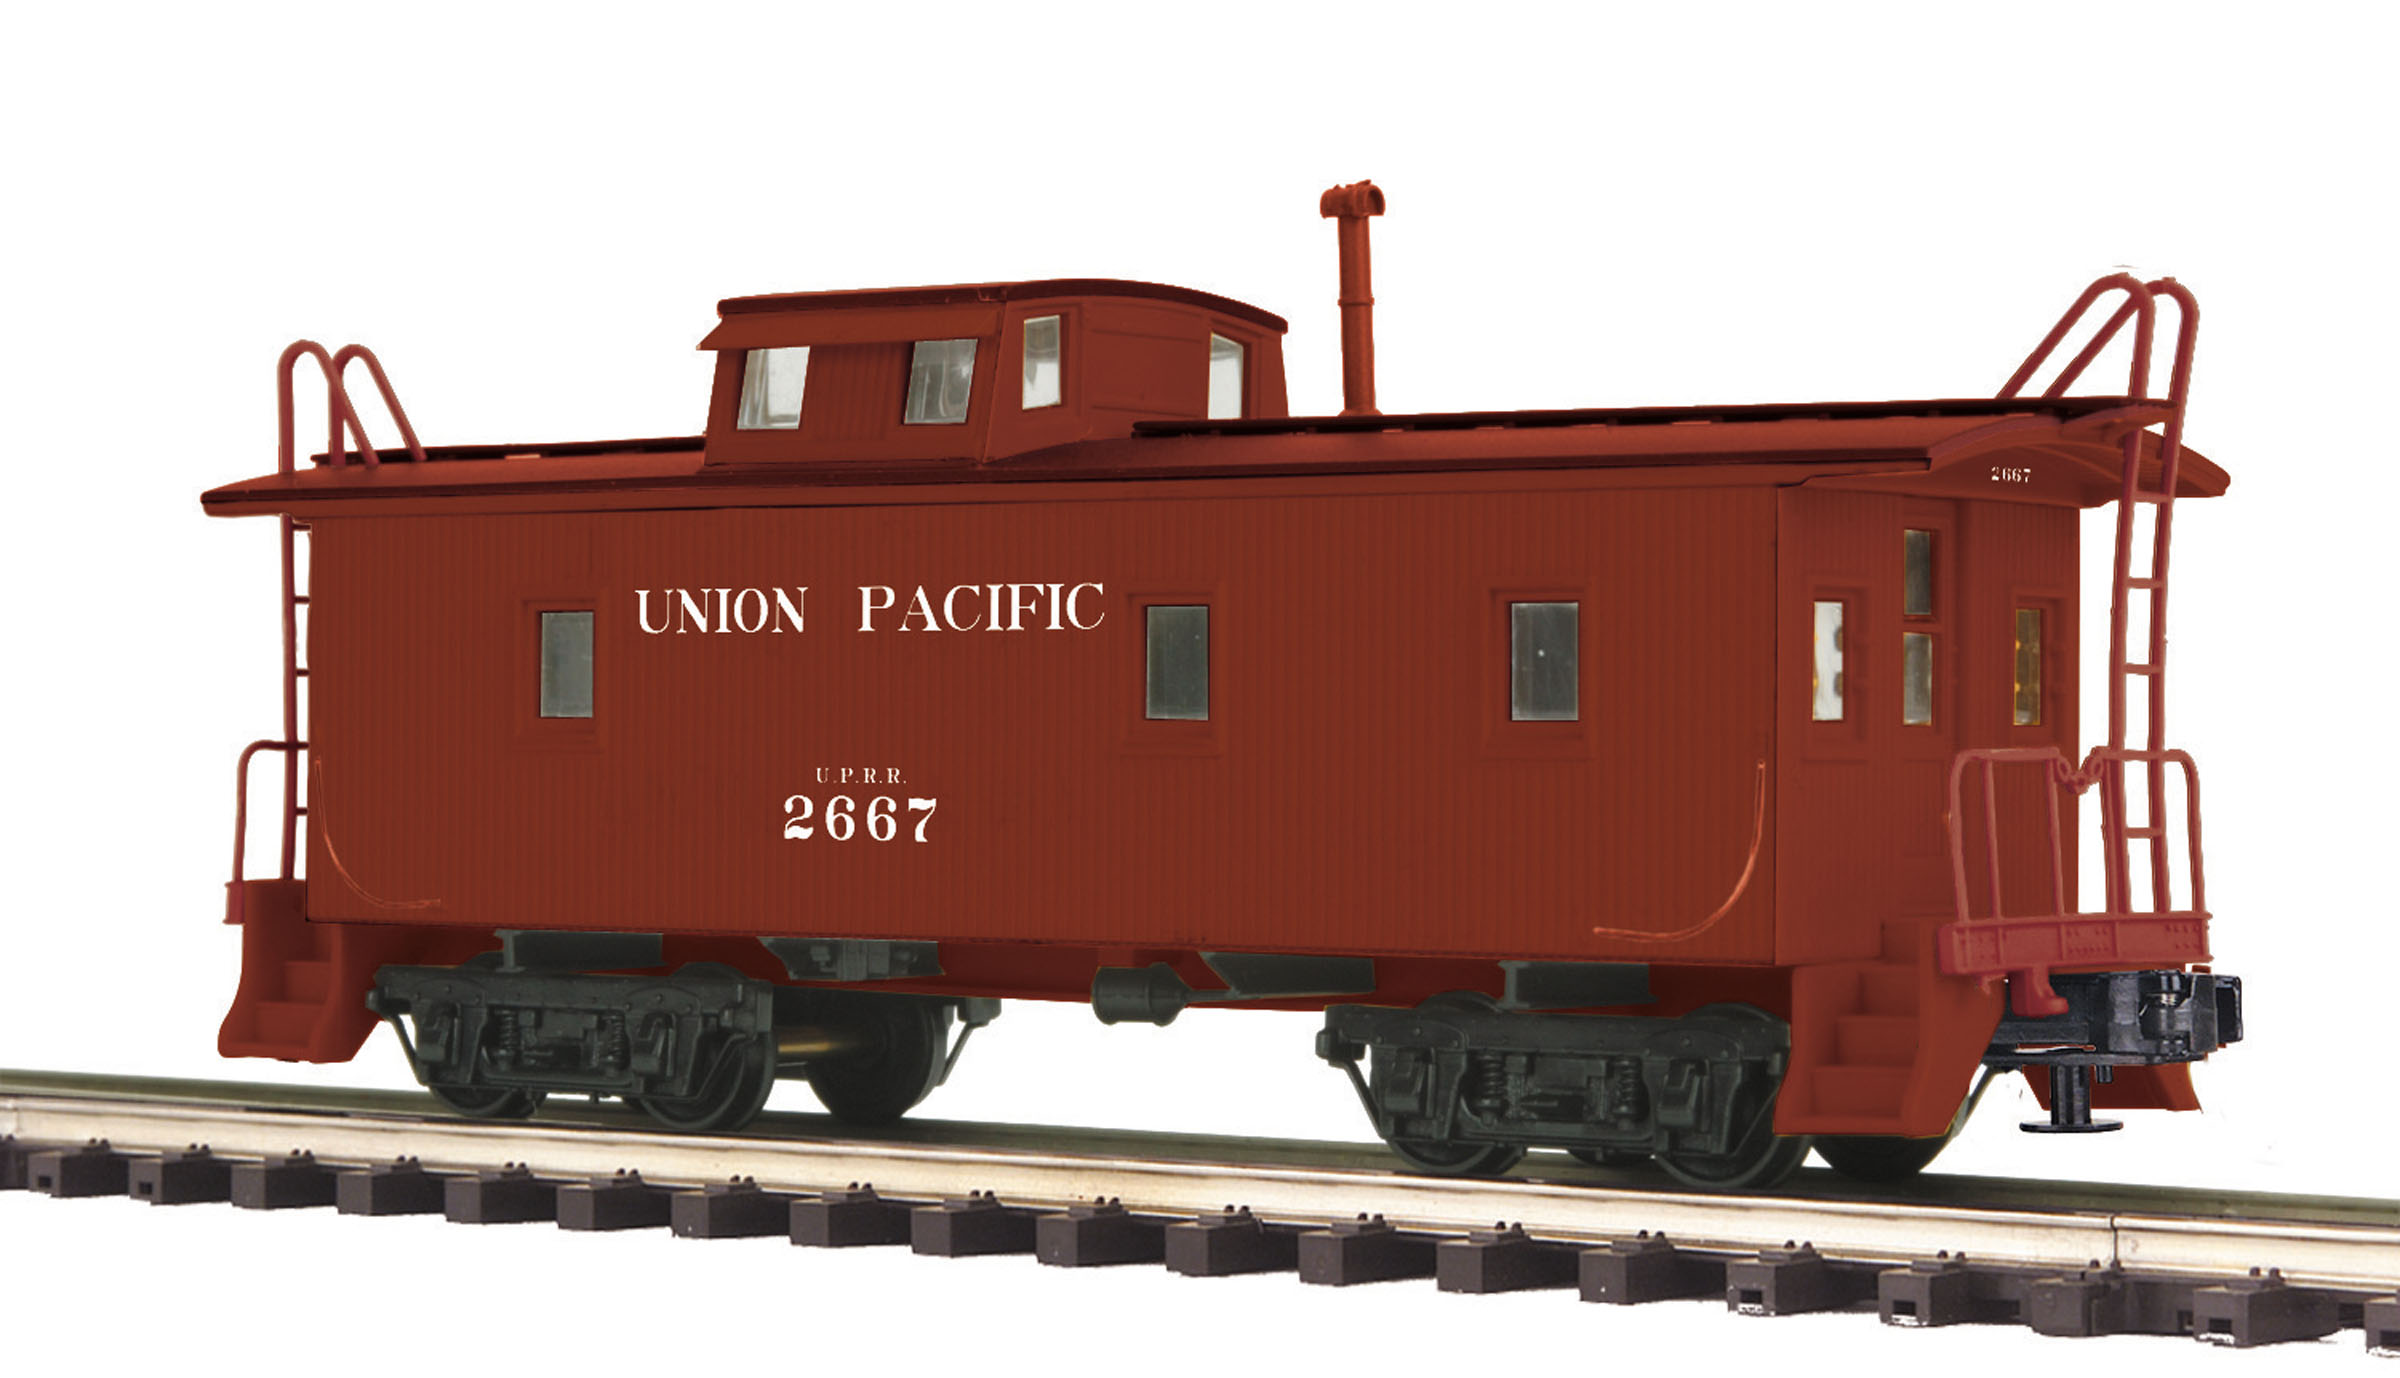 The MTH 20-91292 appeared in the 2009 Volume 2 catalog. It depicts CA 